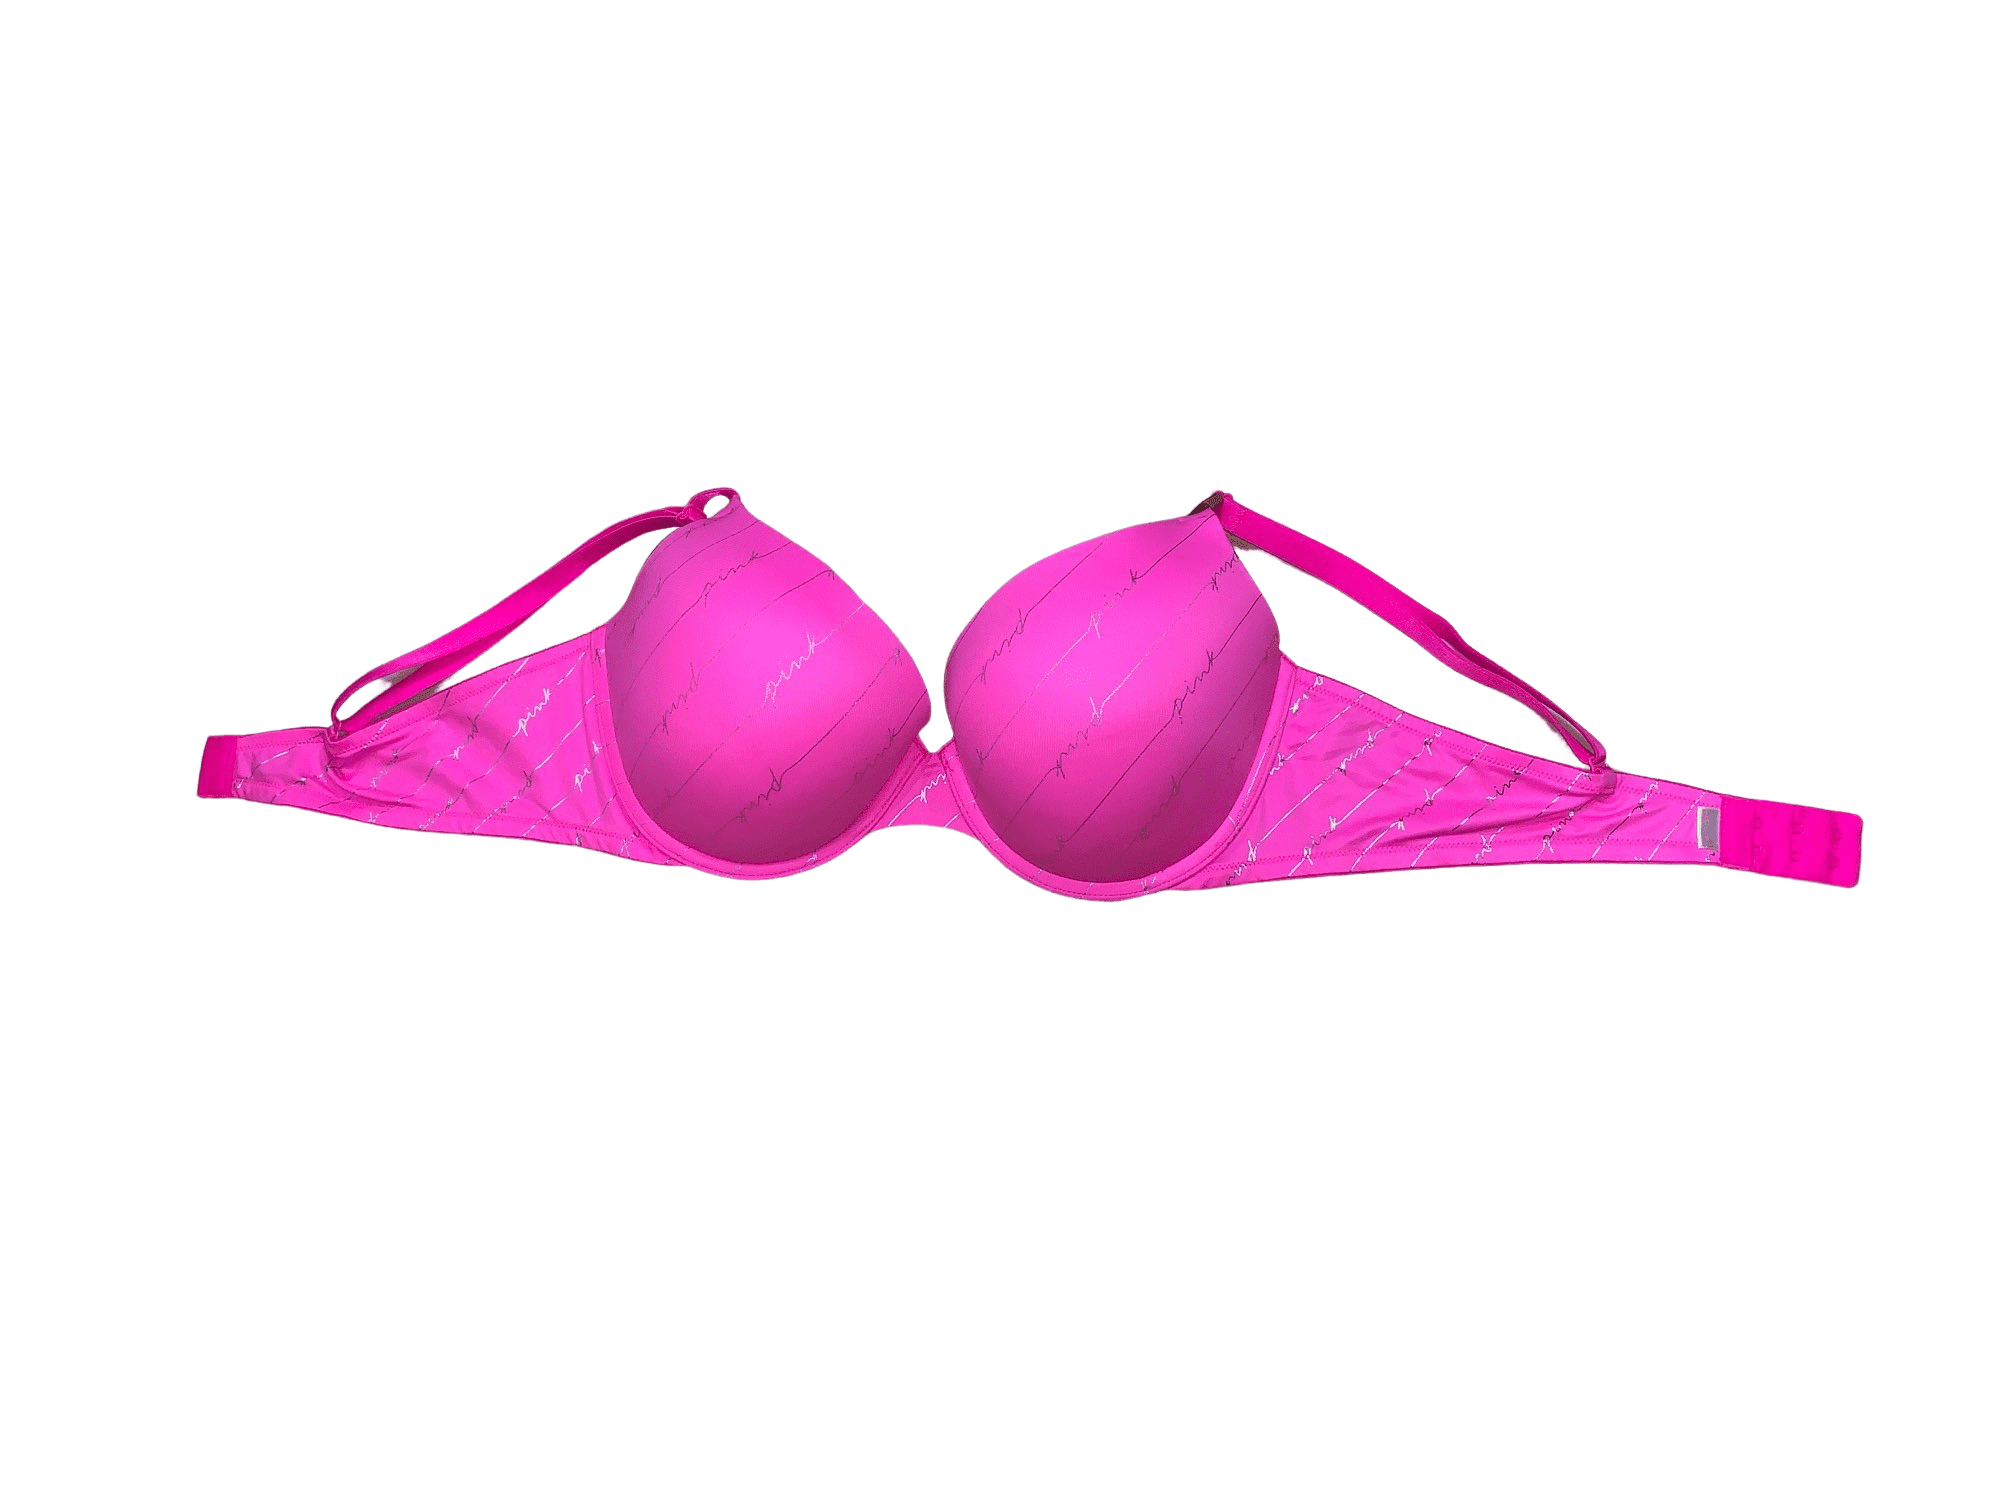 Victoria's Secret bombshell bra 34c with colored decorations.